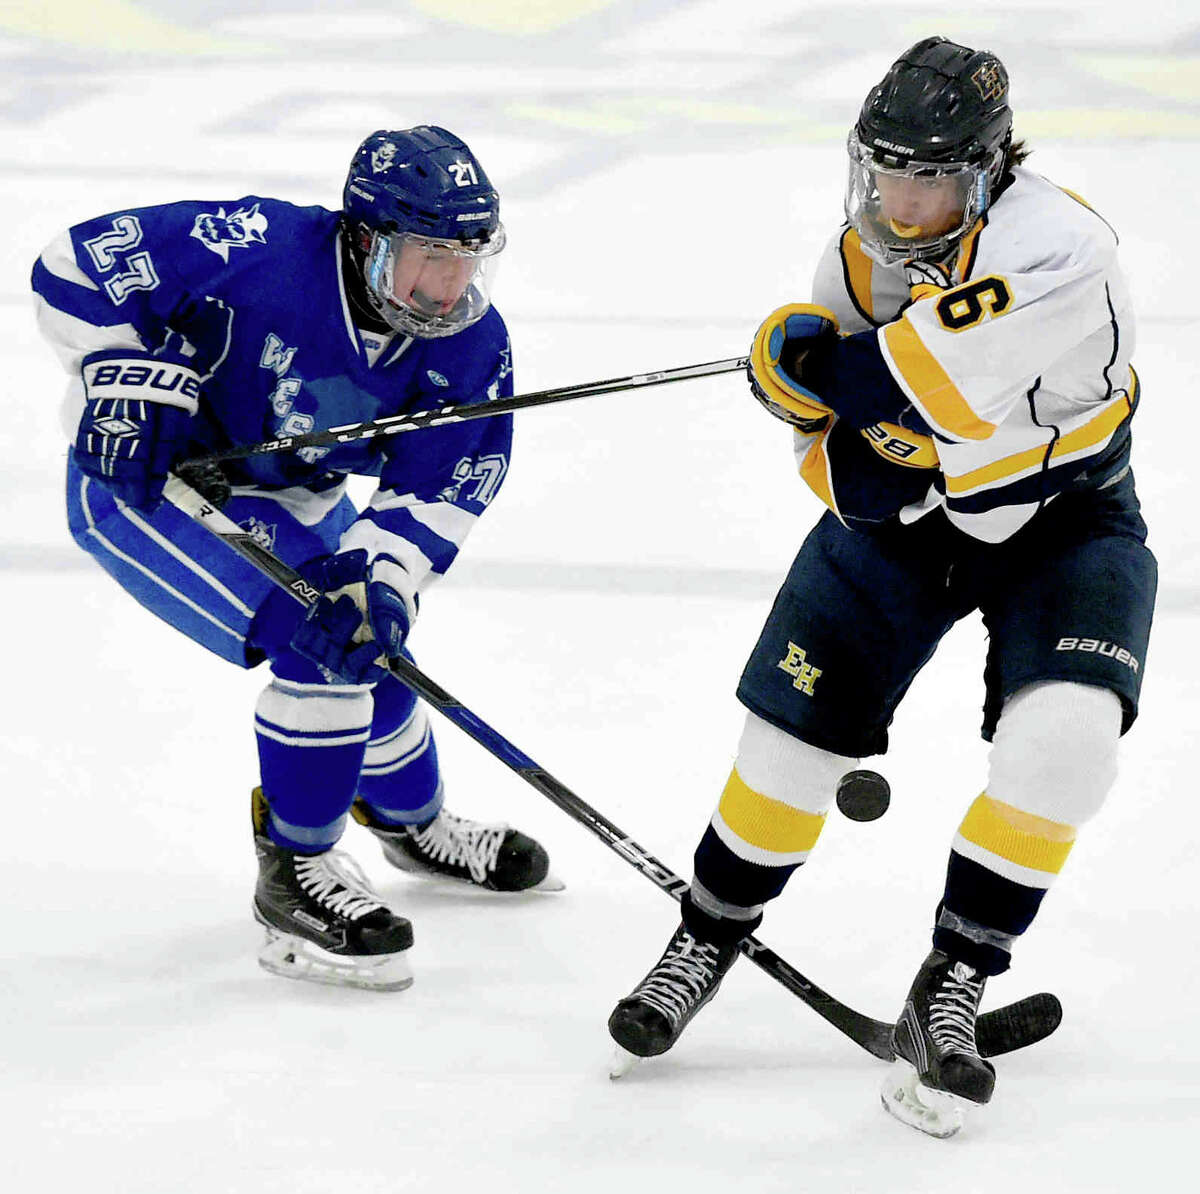 Collin Braziel of West Haven H.S., left, and Joe Lorello of East Haven fight over the puck during first period hockey action Monday afternoon, January 31, 2017 at DiLungo Rink in East Haven. (Peter Hvizdak – New Haven Register)